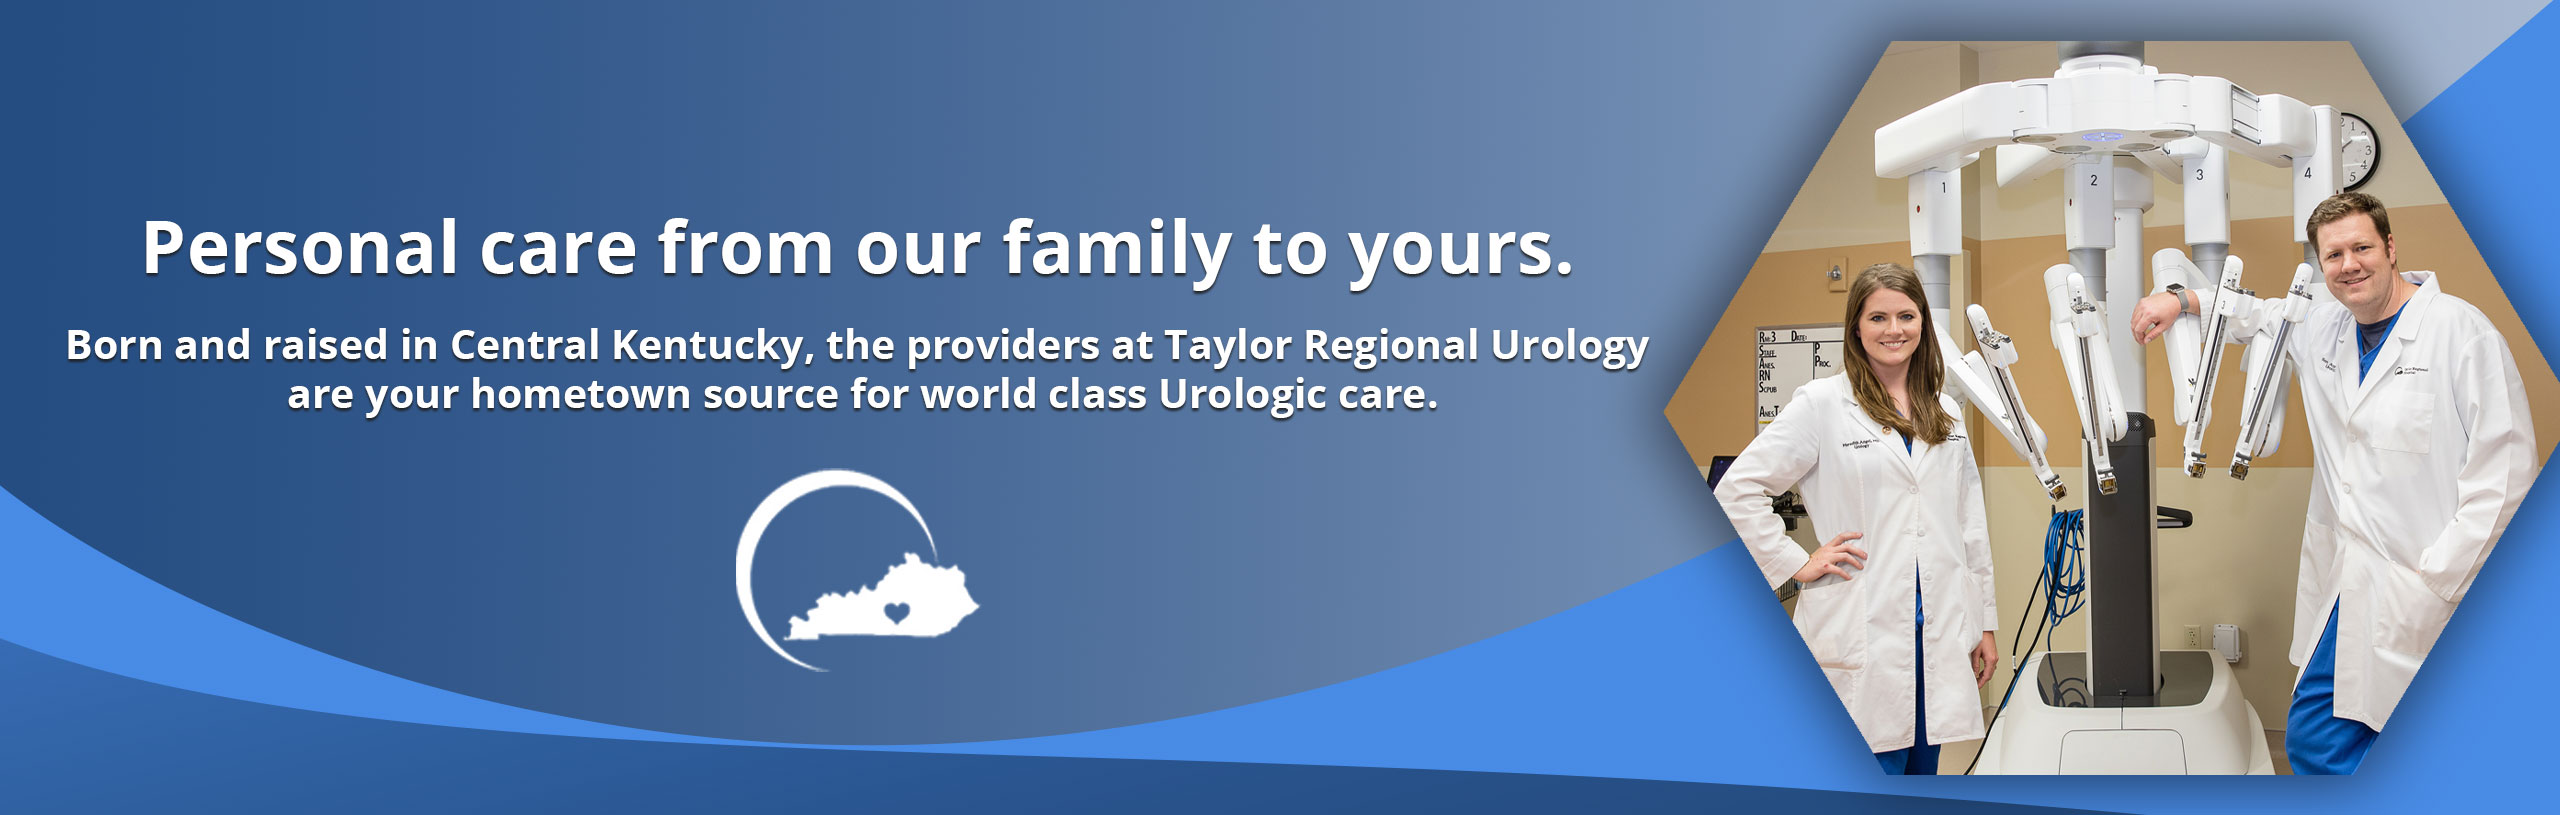 Banner picture of two Urologist (female and male) standing next to a large Urology machine smiling. 

Banner says:
Personal care from our family to yours.  
Born and raised in Central Kentucky, the providers at Taylor Regional Urology are your hometown source for world class Urologic care.